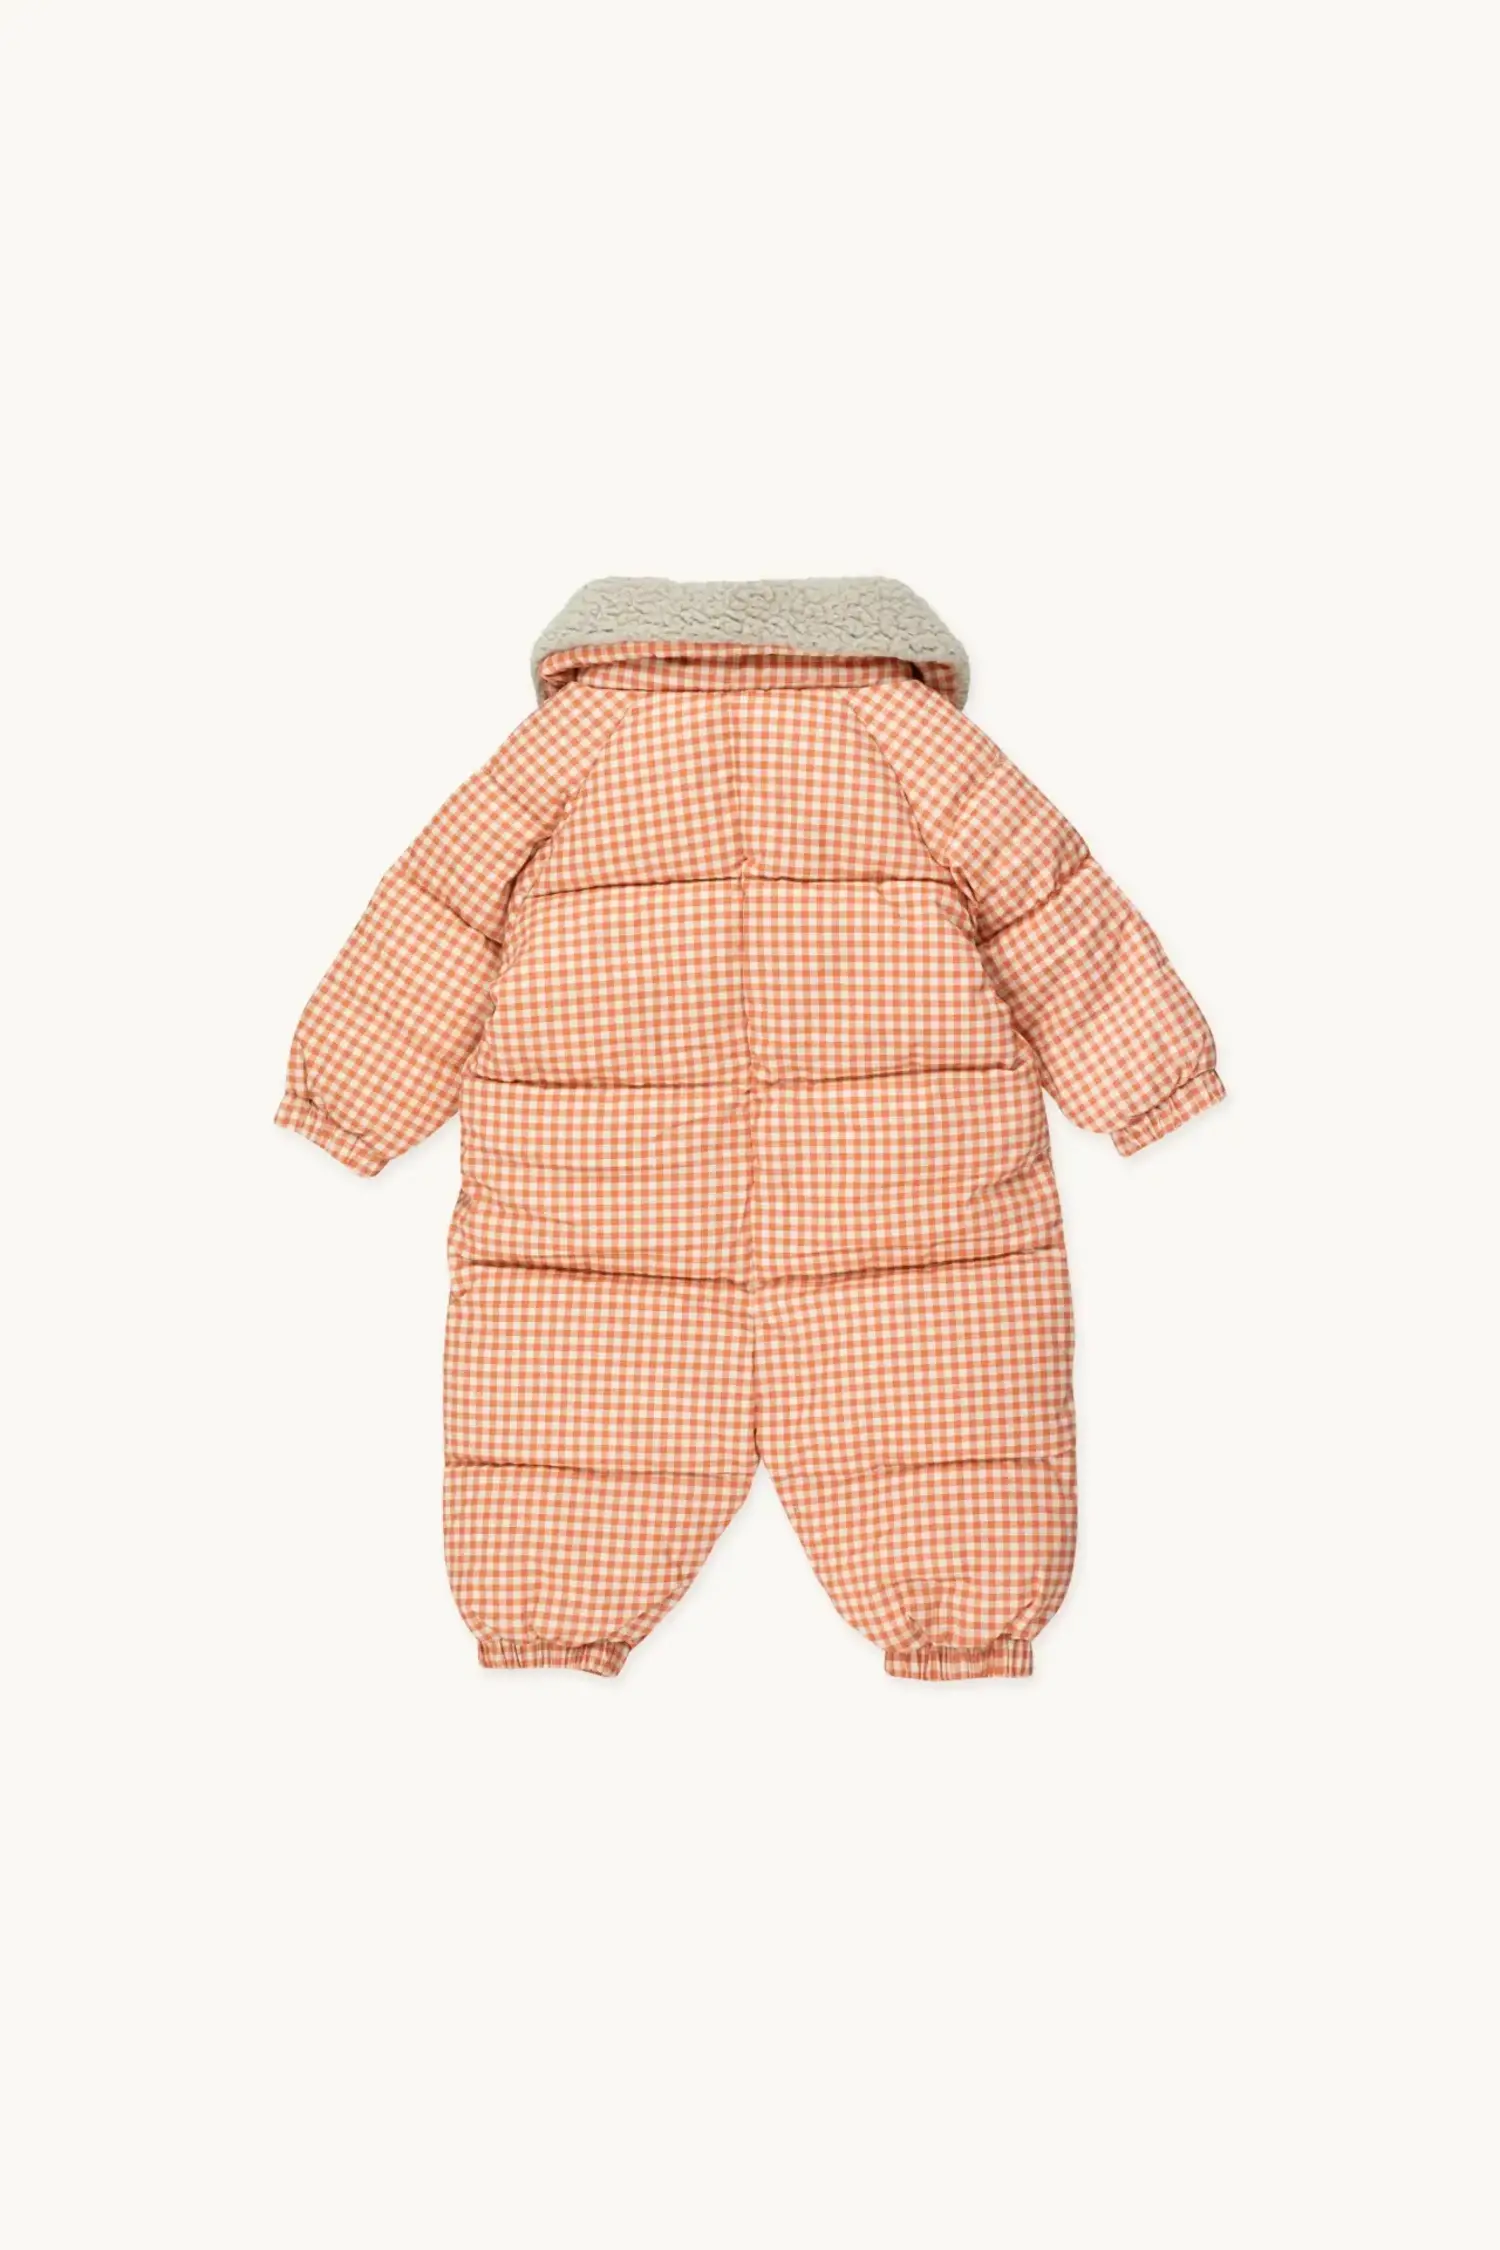 Vichy Padded Overall - Light Rust/ Light Cream - Couleur Locale Kids